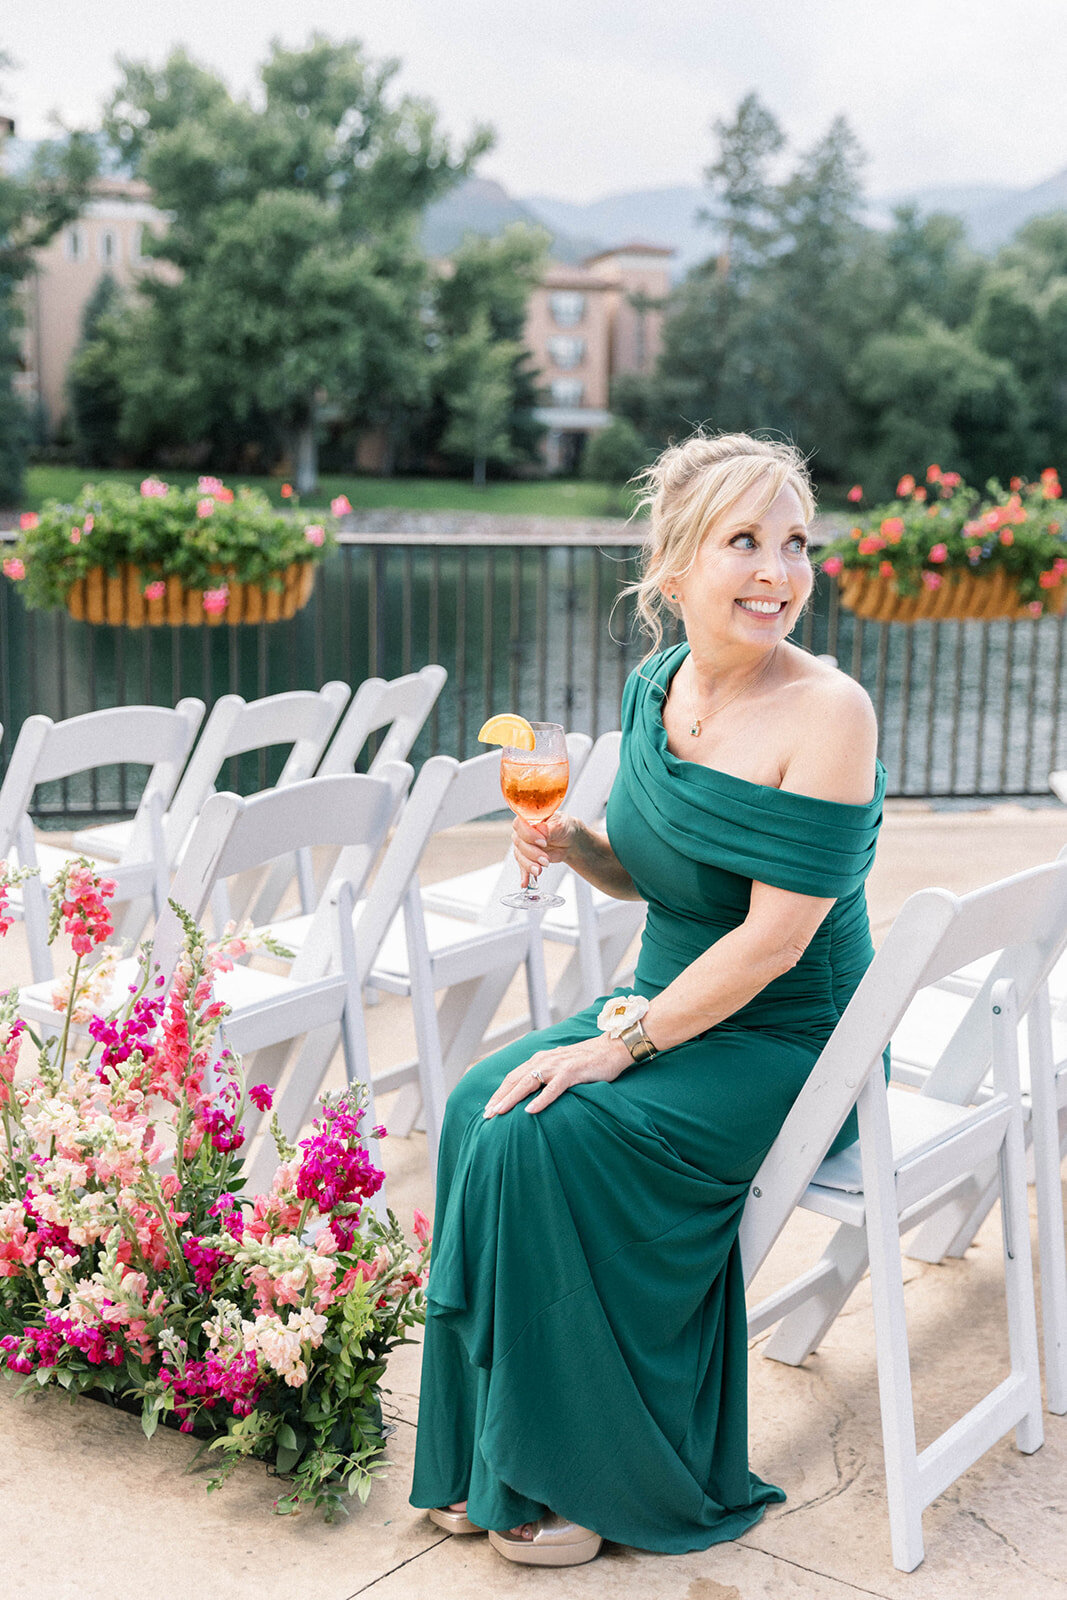 M%2bE_The_Broadmoor_Lakeside_Terrace_Wedding_Highlights_by_Diana_Coulter-36